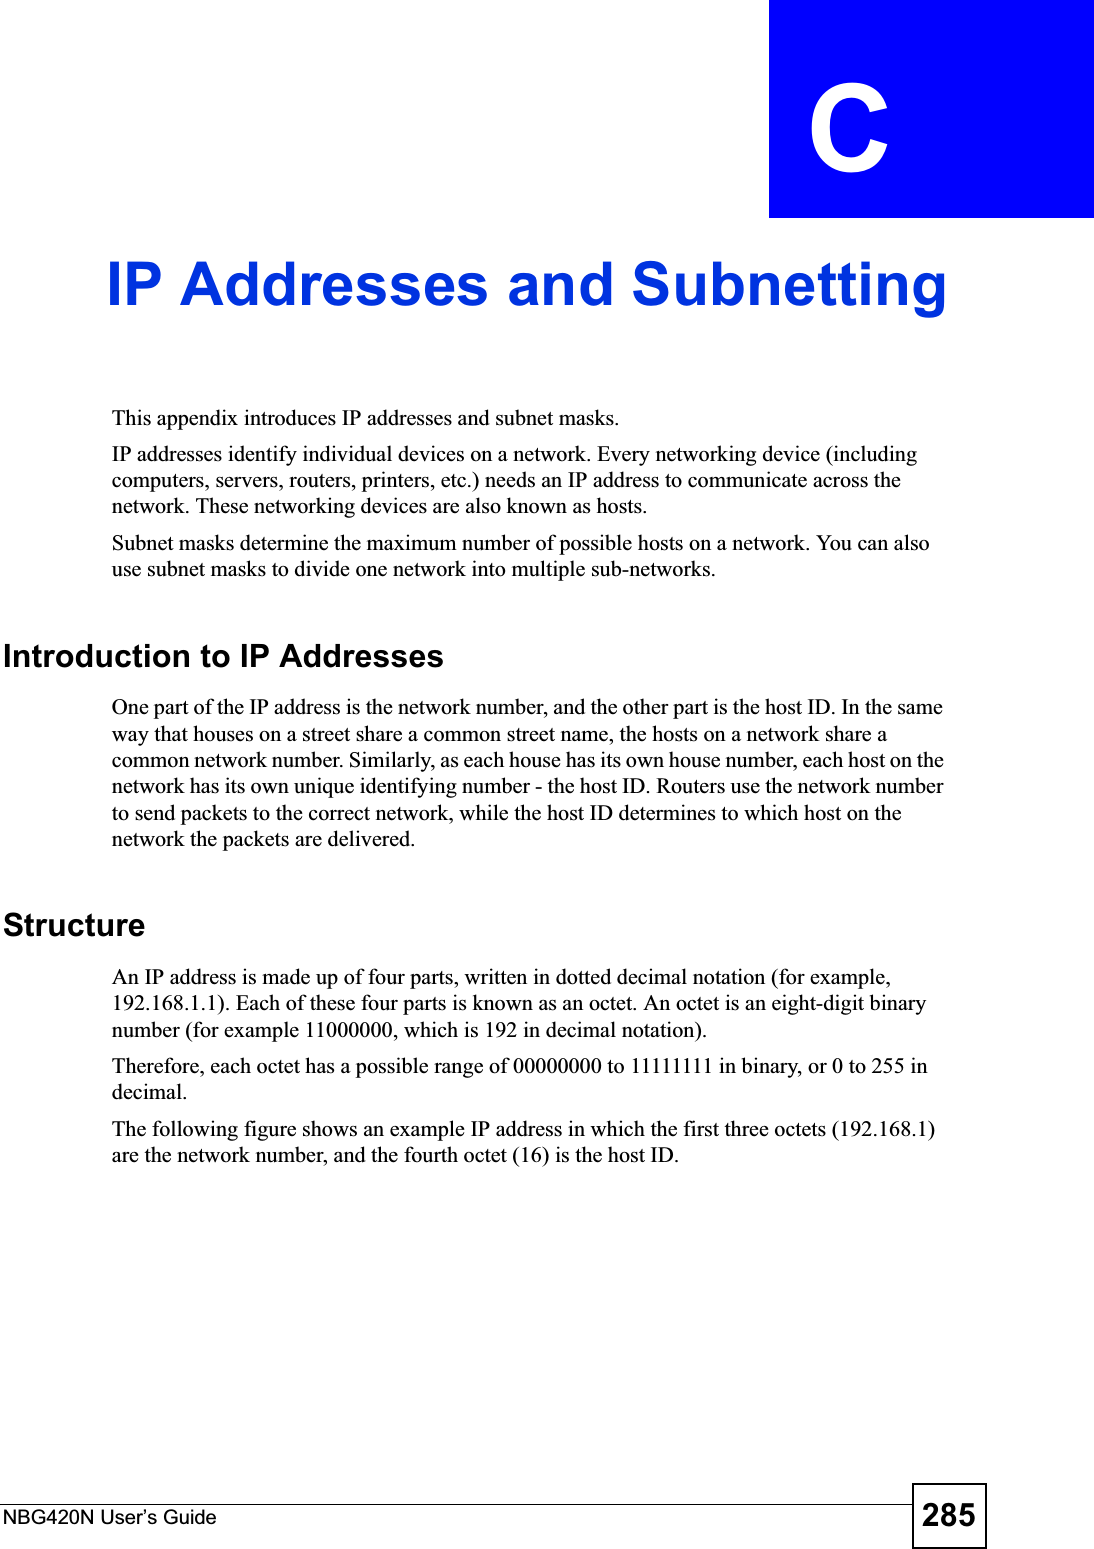 NBG420N User’s Guide 285APPENDIX  C IP Addresses and SubnettingThis appendix introduces IP addresses and subnet masks. IP addresses identify individual devices on a network. Every networking device (including computers, servers, routers, printers, etc.) needs an IP address to communicate across the network. These networking devices are also known as hosts.Subnet masks determine the maximum number of possible hosts on a network. You can also use subnet masks to divide one network into multiple sub-networks.Introduction to IP AddressesOne part of the IP address is the network number, and the other part is the host ID. In the same way that houses on a street share a common street name, the hosts on a network share a common network number. Similarly, as each house has its own house number, each host on the network has its own unique identifying number - the host ID. Routers use the network number to send packets to the correct network, while the host ID determines to which host on the network the packets are delivered.StructureAn IP address is made up of four parts, written in dotted decimal notation (for example, 192.168.1.1). Each of these four parts is known as an octet. An octet is an eight-digit binary number (for example 11000000, which is 192 in decimal notation). Therefore, each octet has a possible range of 00000000 to 11111111 in binary, or 0 to 255 in decimal.The following figure shows an example IP address in which the first three octets (192.168.1) are the network number, and the fourth octet (16) is the host ID.